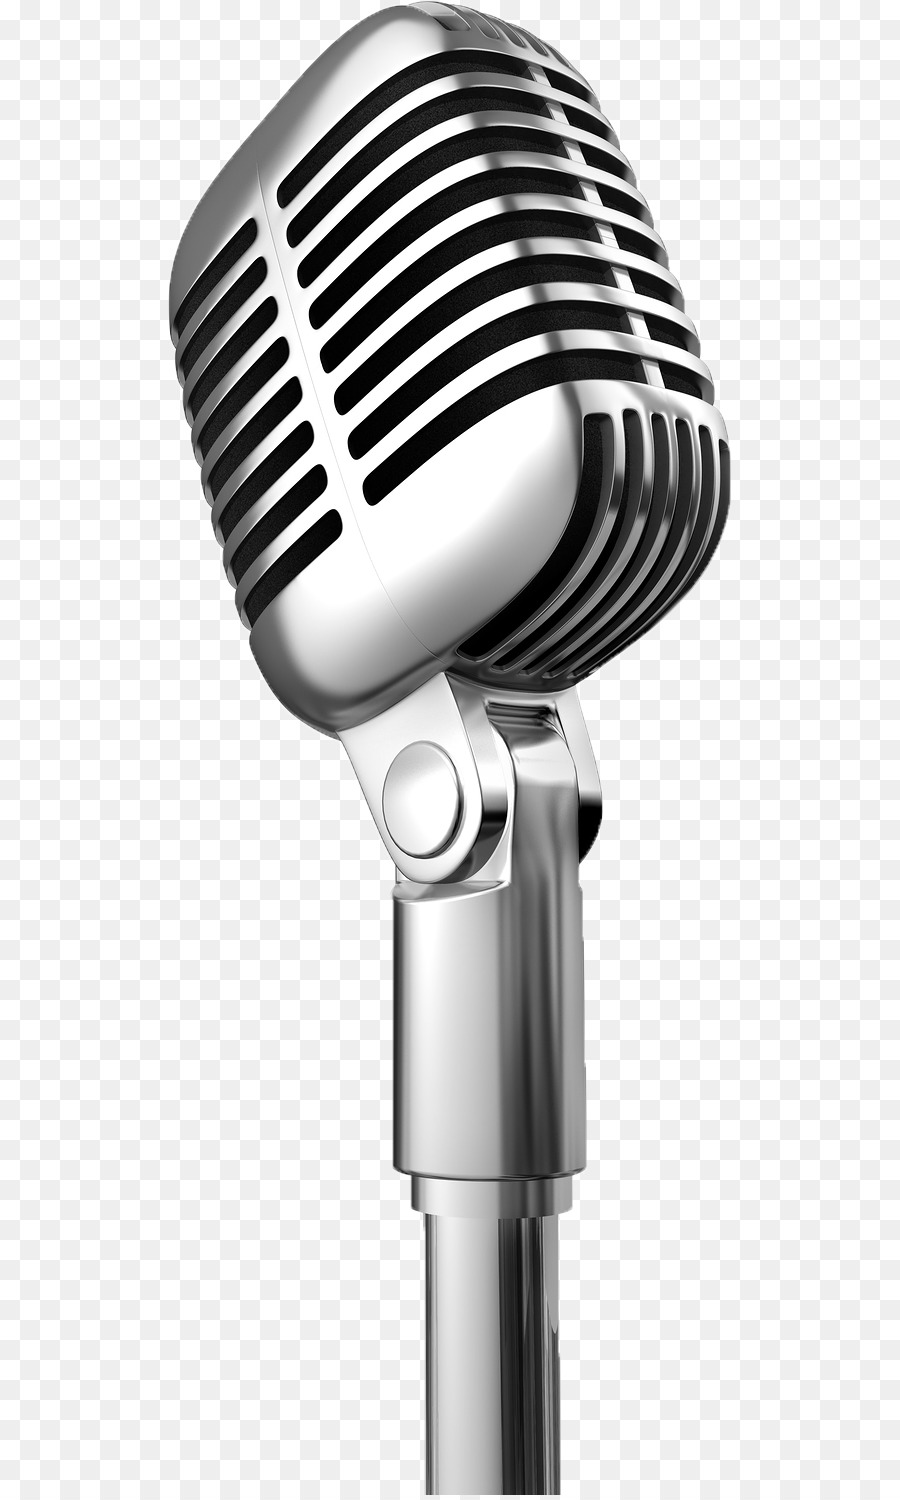 Microphone Audio Clip art - microphone png download - 563*1495 - Free Transparent  png Download.